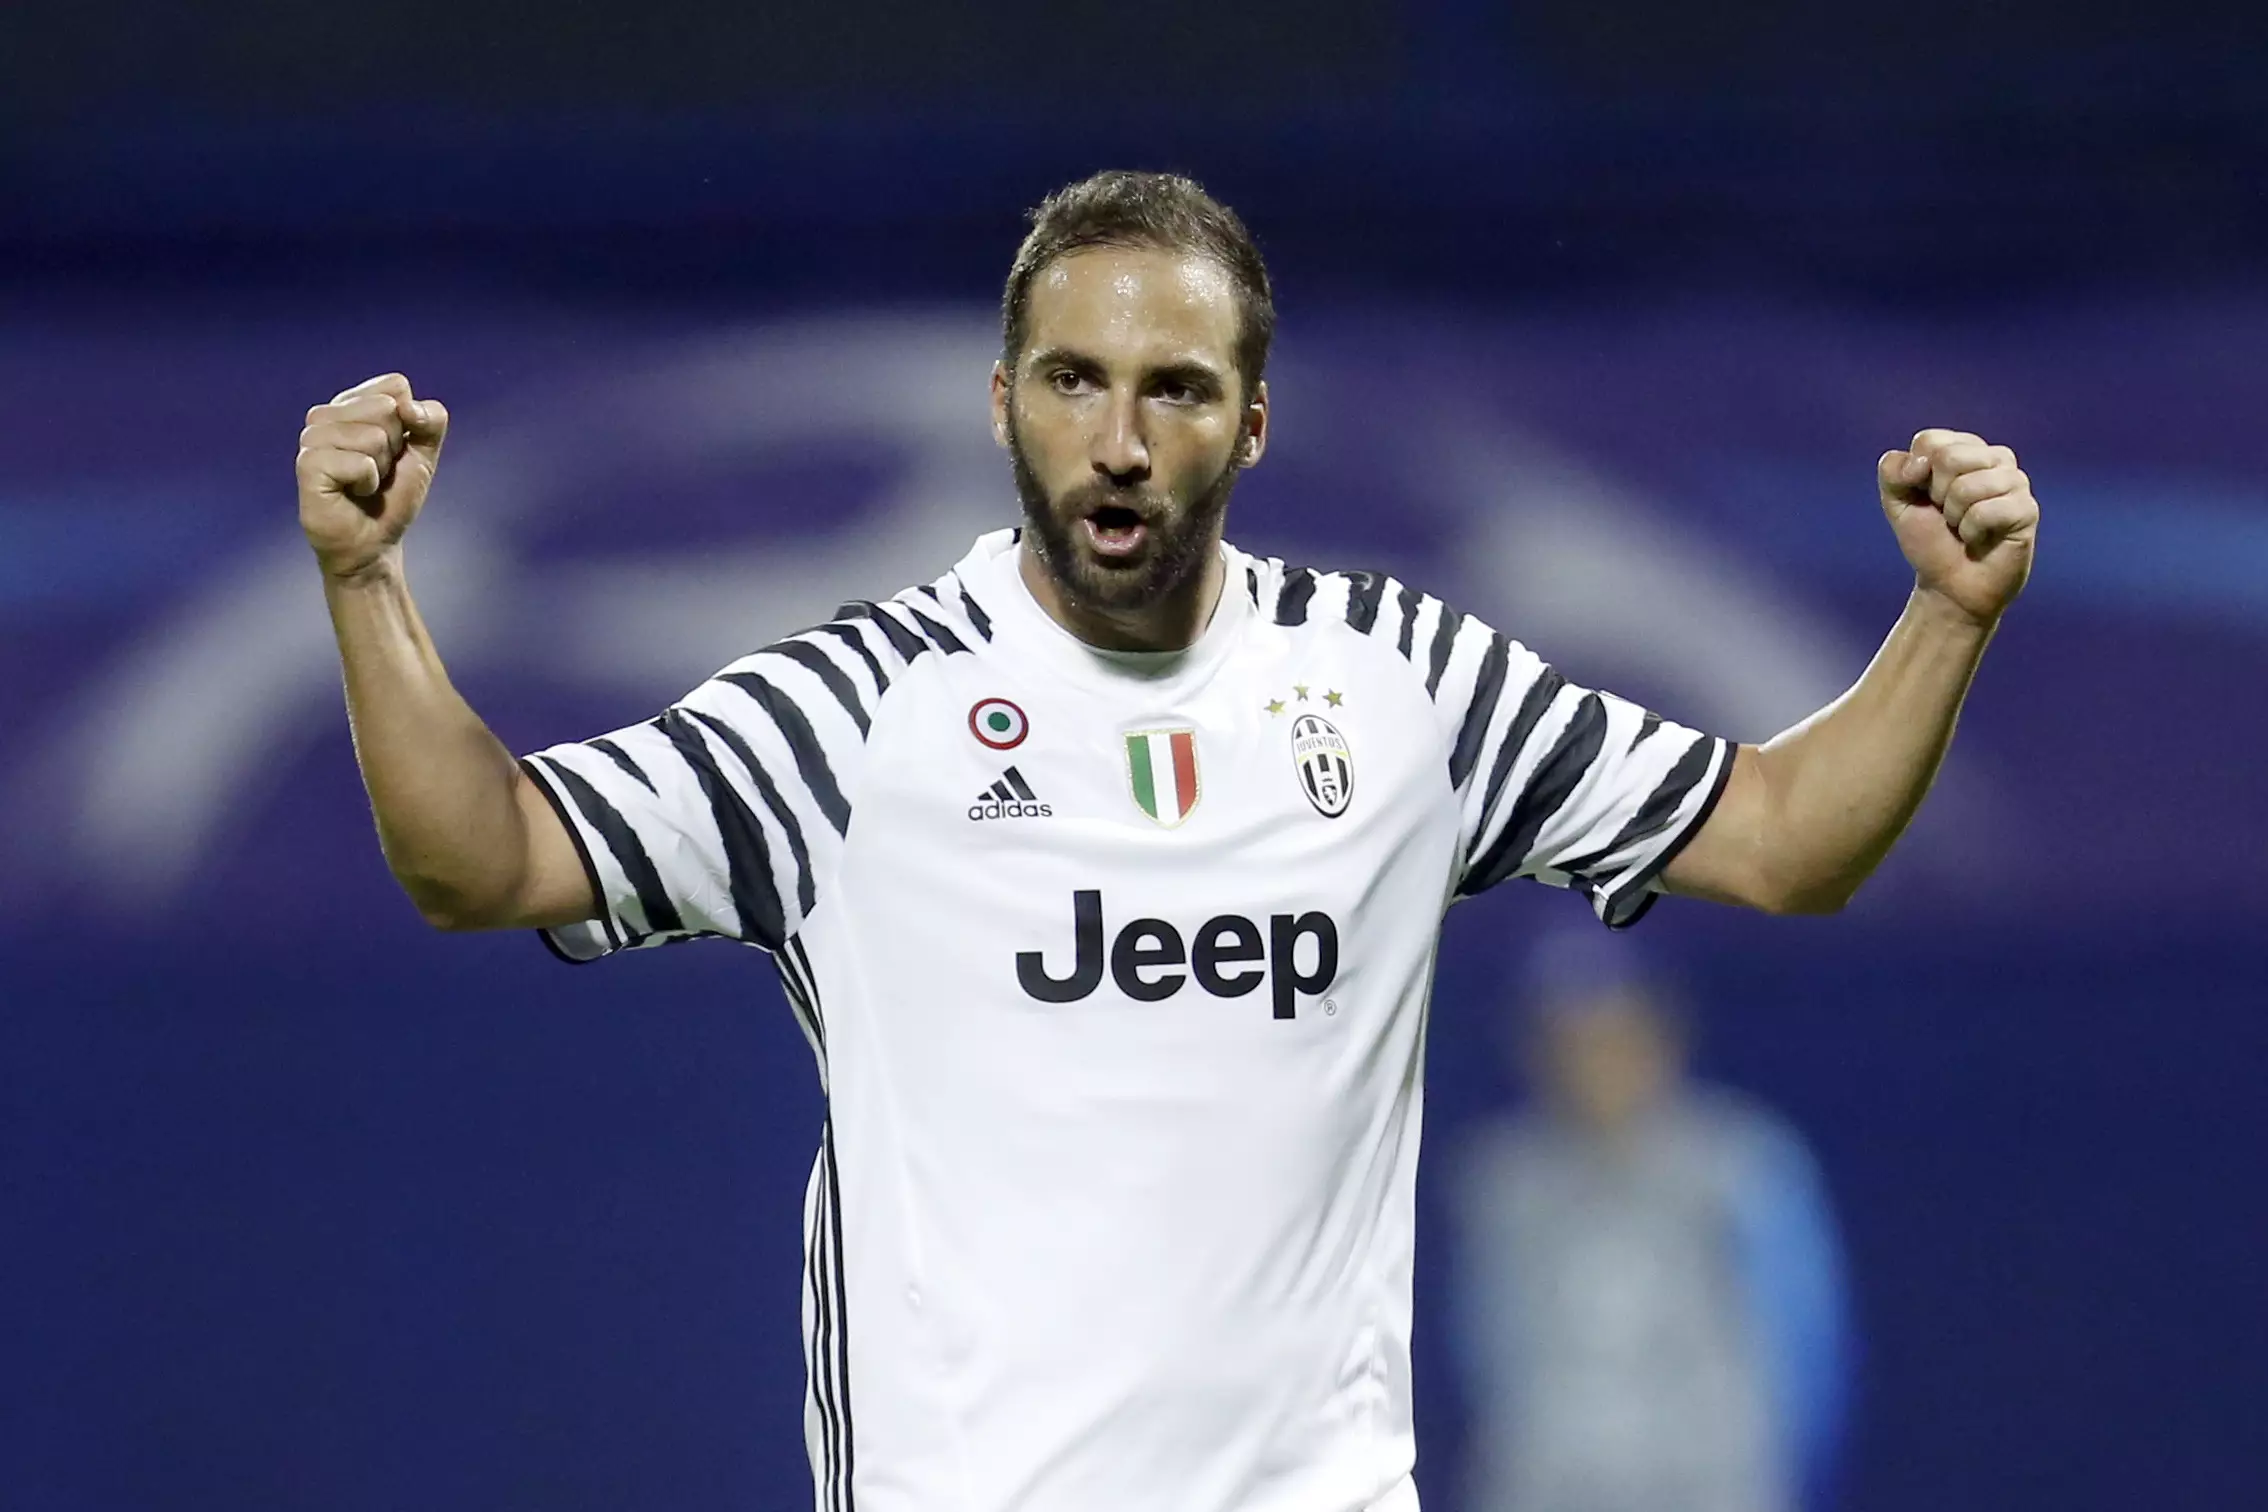 Higuain would be a massive signing for Chelsea. Image: PA Images